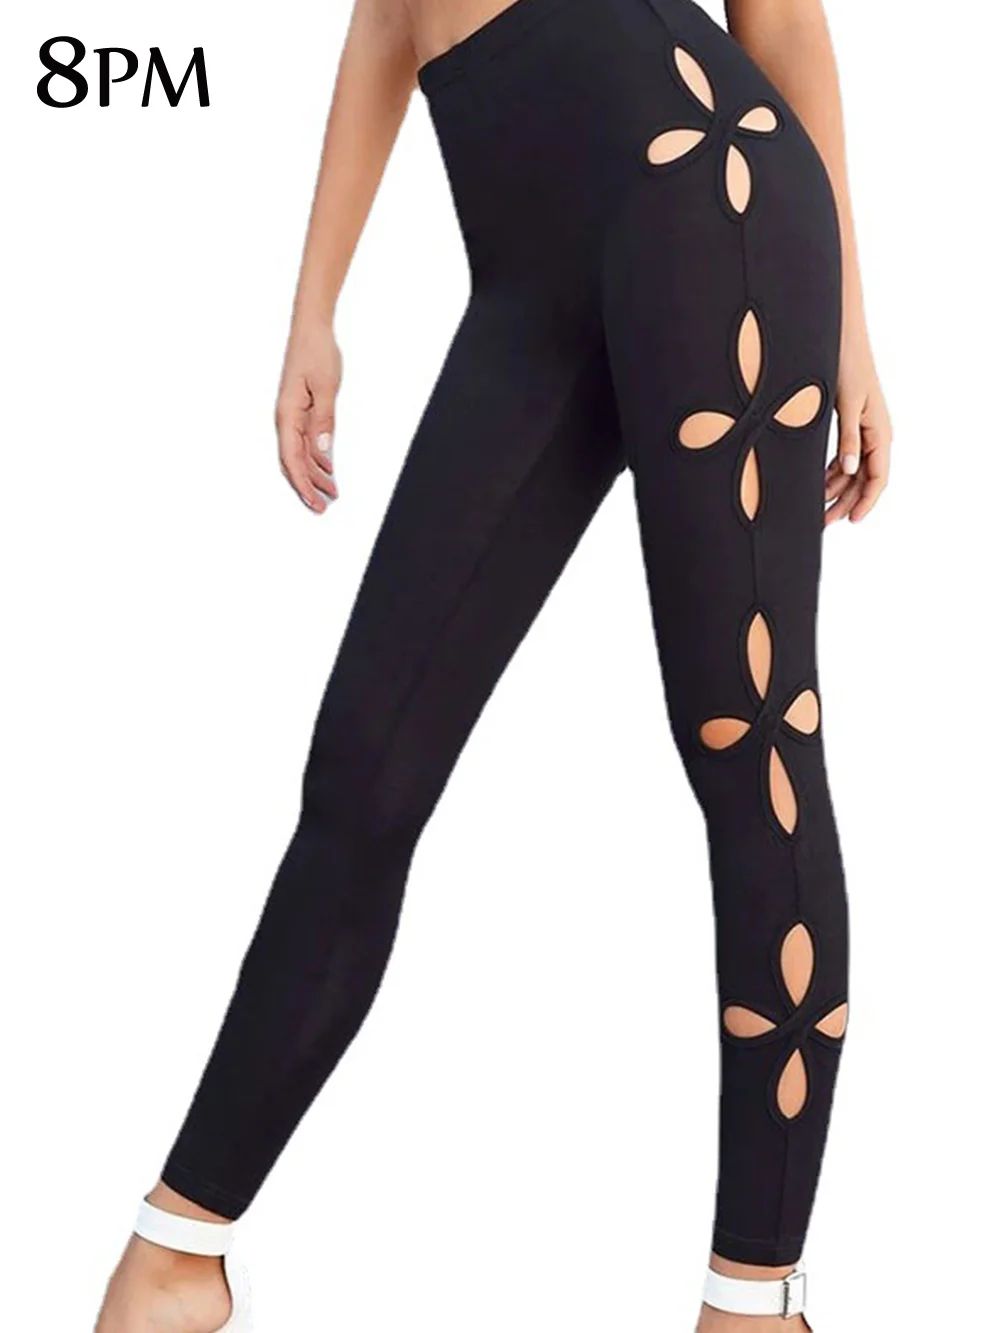 

Women Black Leggings Clover Printed Stretchy Skinny Sheer Mesh Insert Workout Leggings Yoga Tights Casual Stretchy Pants ouc1460